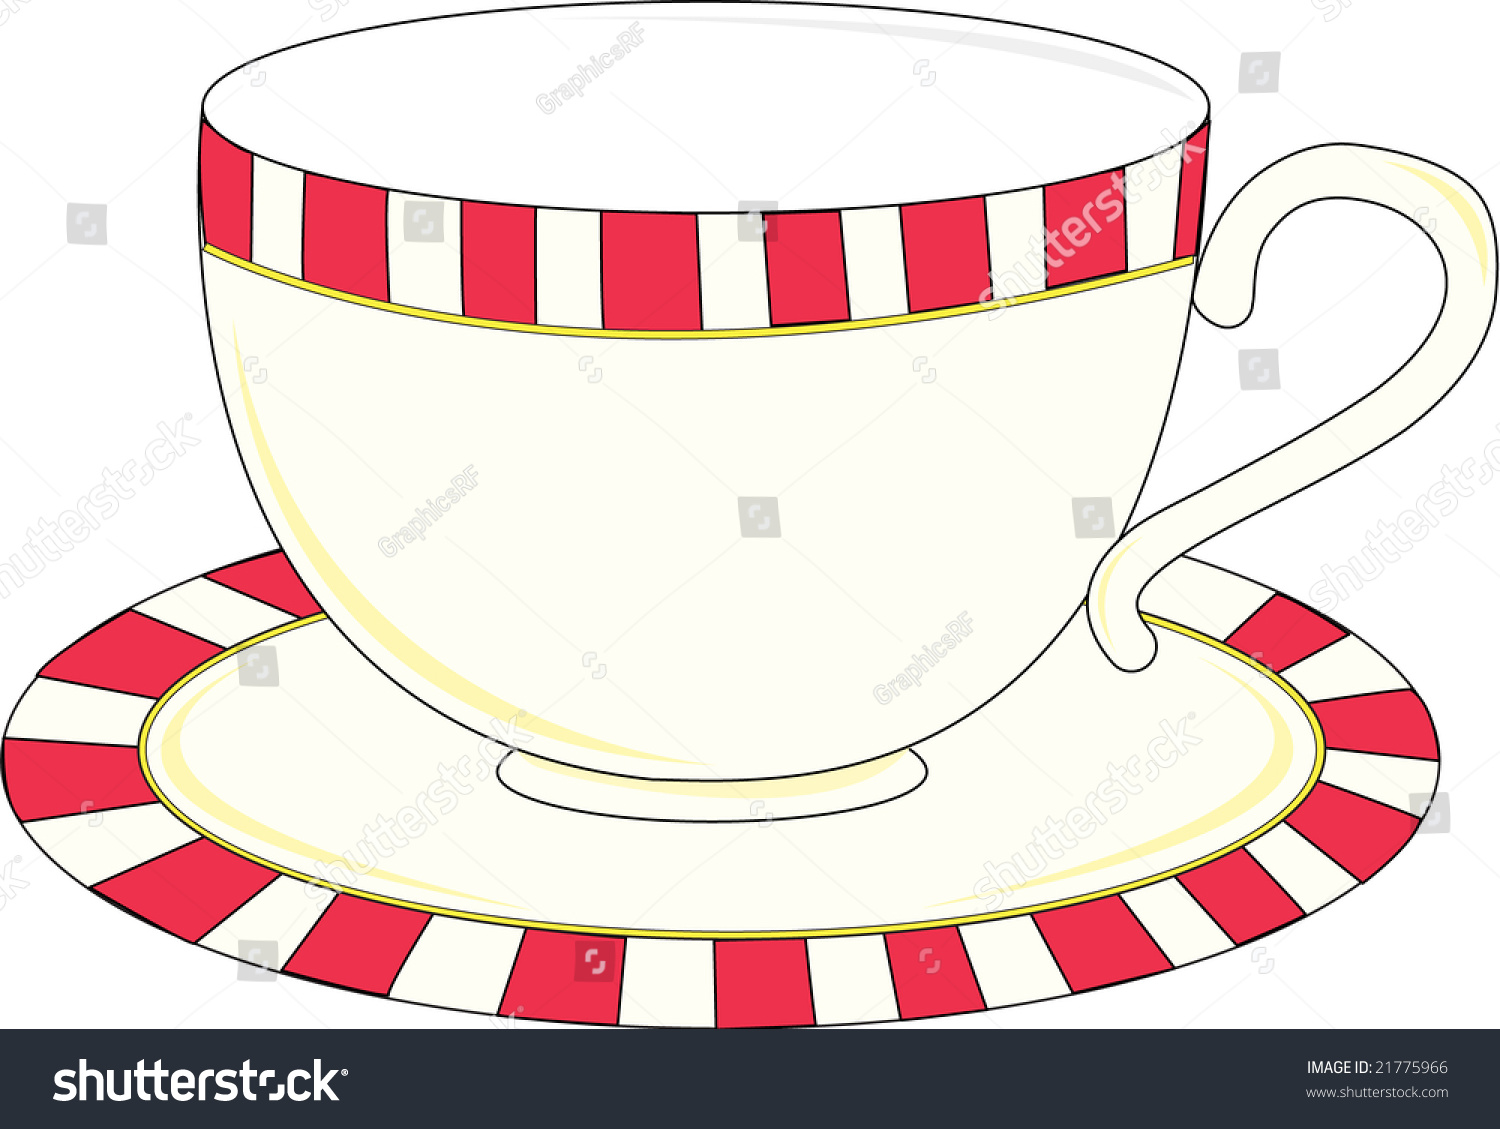 cup and saucer clipart - photo #42